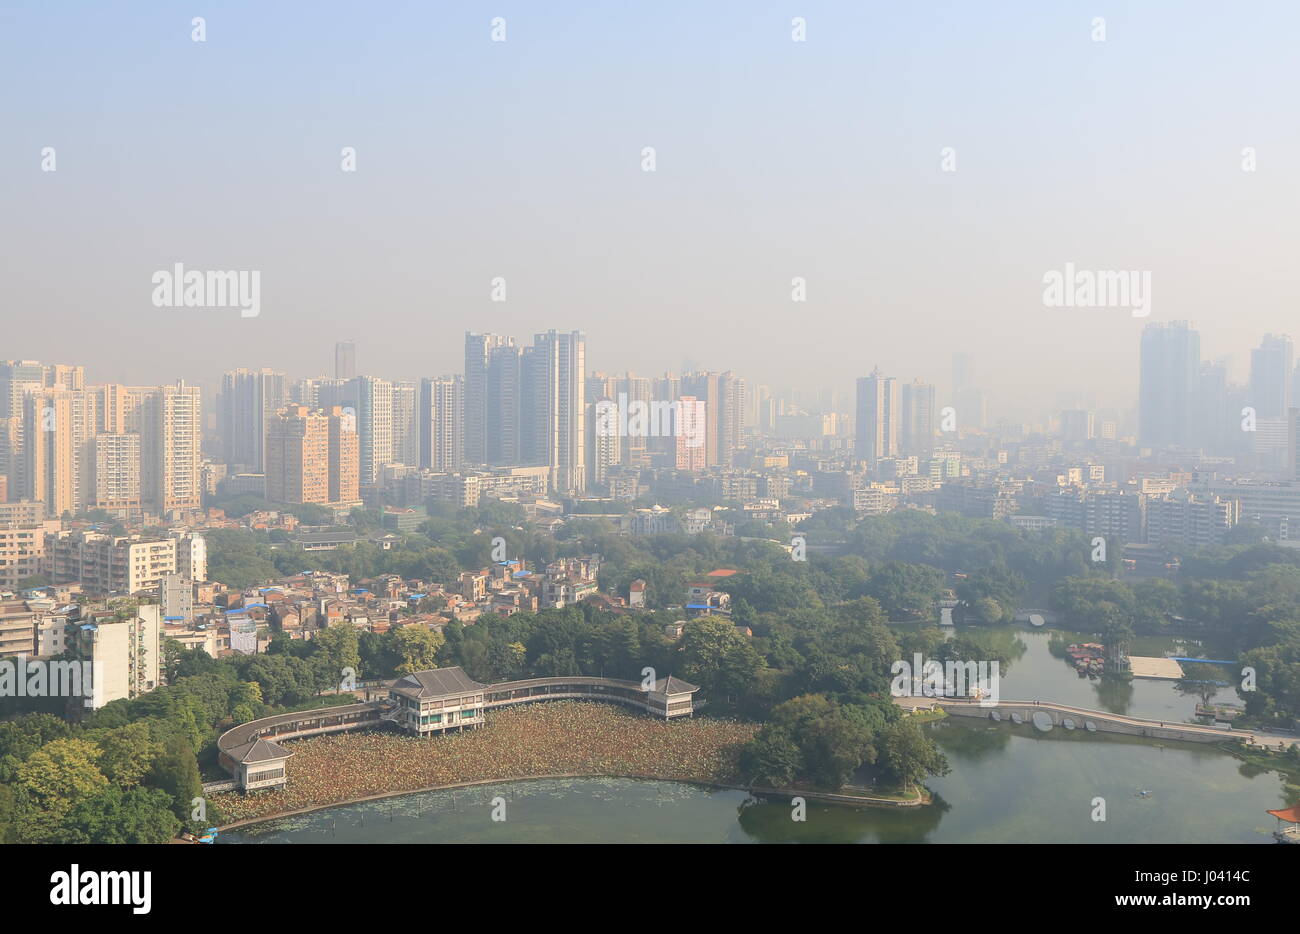 Liwan lake Park cityscape in Guangzhou Chine Banque D'Images